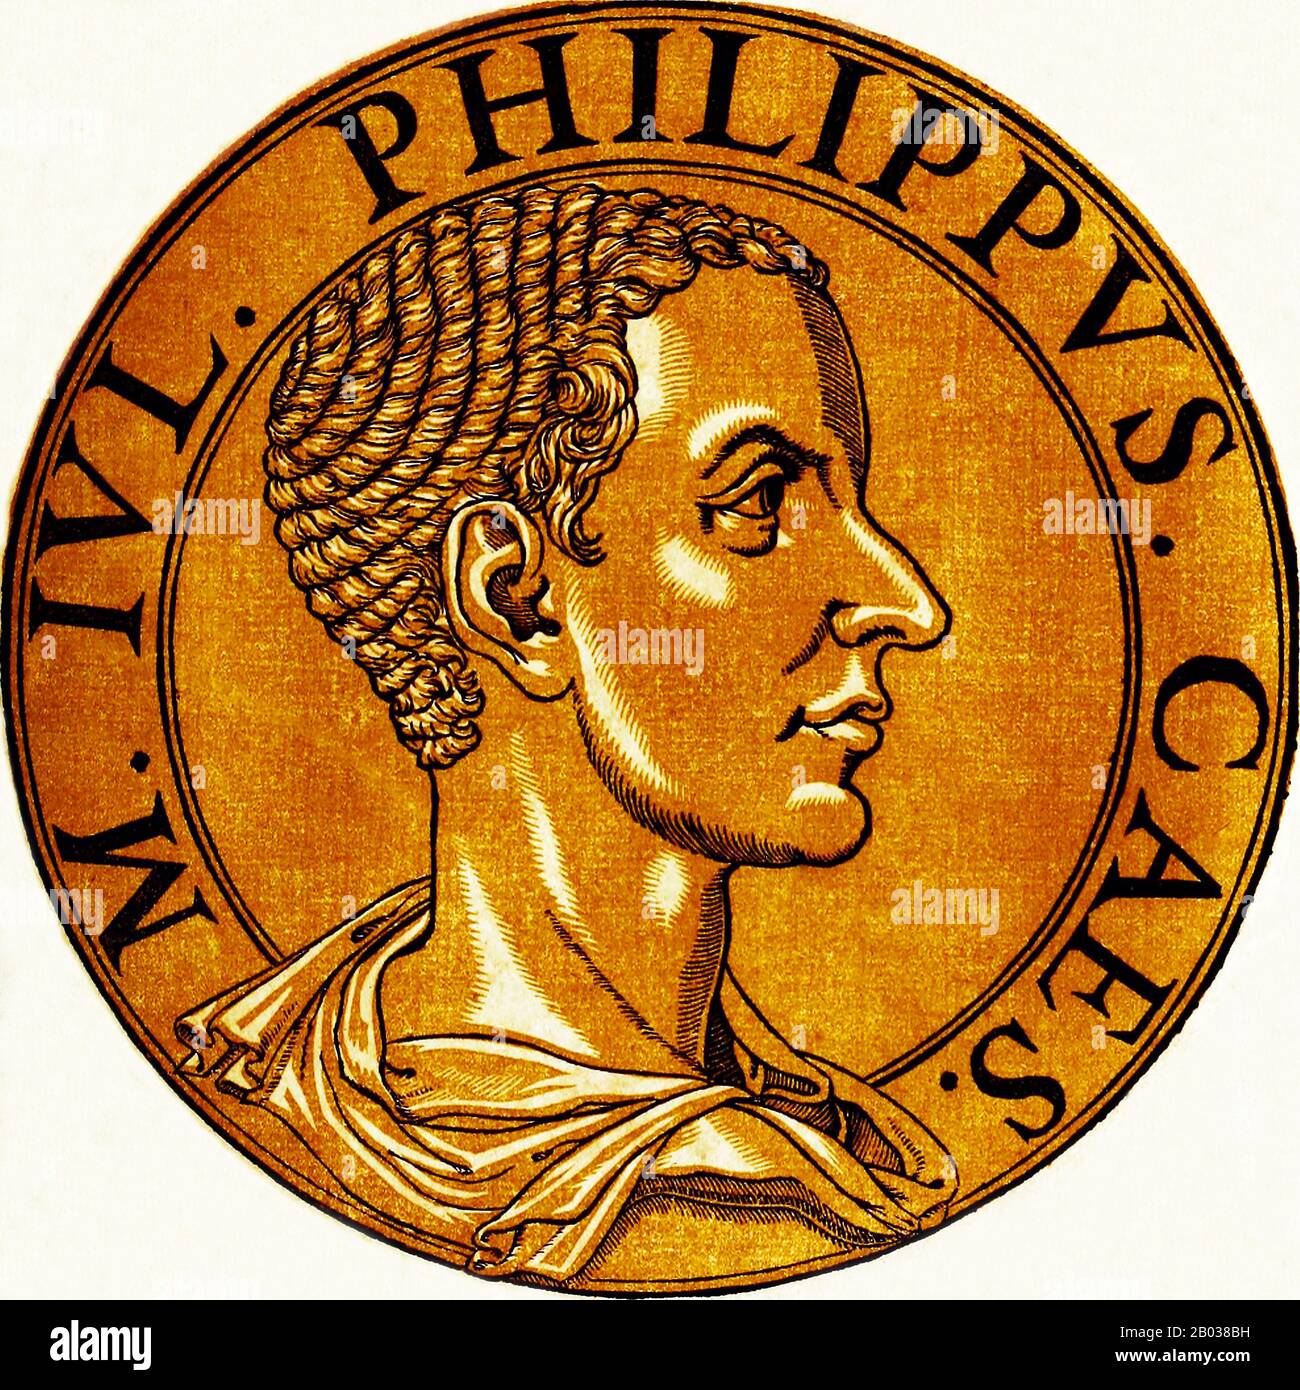 Philip II (238-249), also known as Philippus II and Philip the Younger, was the son and heir to Emperor Philip I, or Philip the Arab. When Philip I became emperor in 244, Philip II was appointed Caesar, and served as consul in 247. His father eventually elevated him to Augustus and co-emperor some time later.  Philip I was killed in battle with rival claimant Decius in 249, and when news of his death reached Rome the Praetorian Guard murdered Philip II. It was said that he died in his mother's arms, aged only eleven. Stock Photo